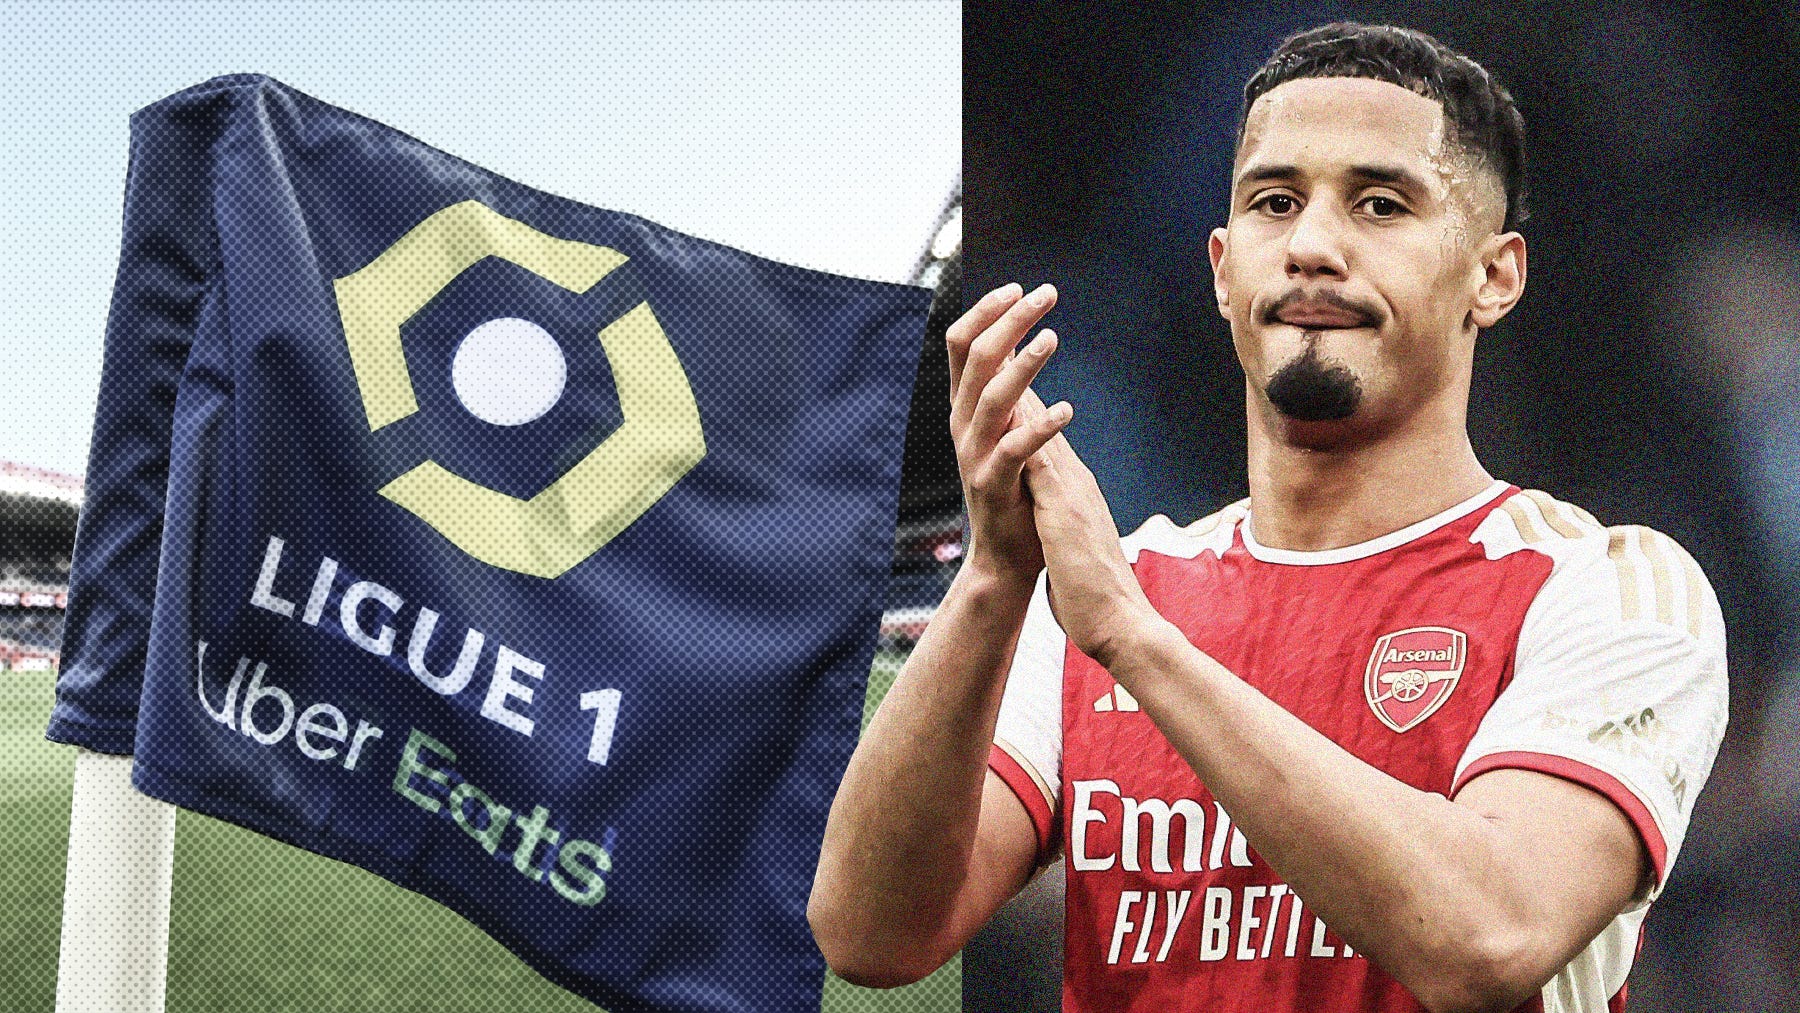 A photo of a Ligue 1 corner flag at PSG's Parc des Princes with a photo of Arsenal's WIlliam Saliba clapping